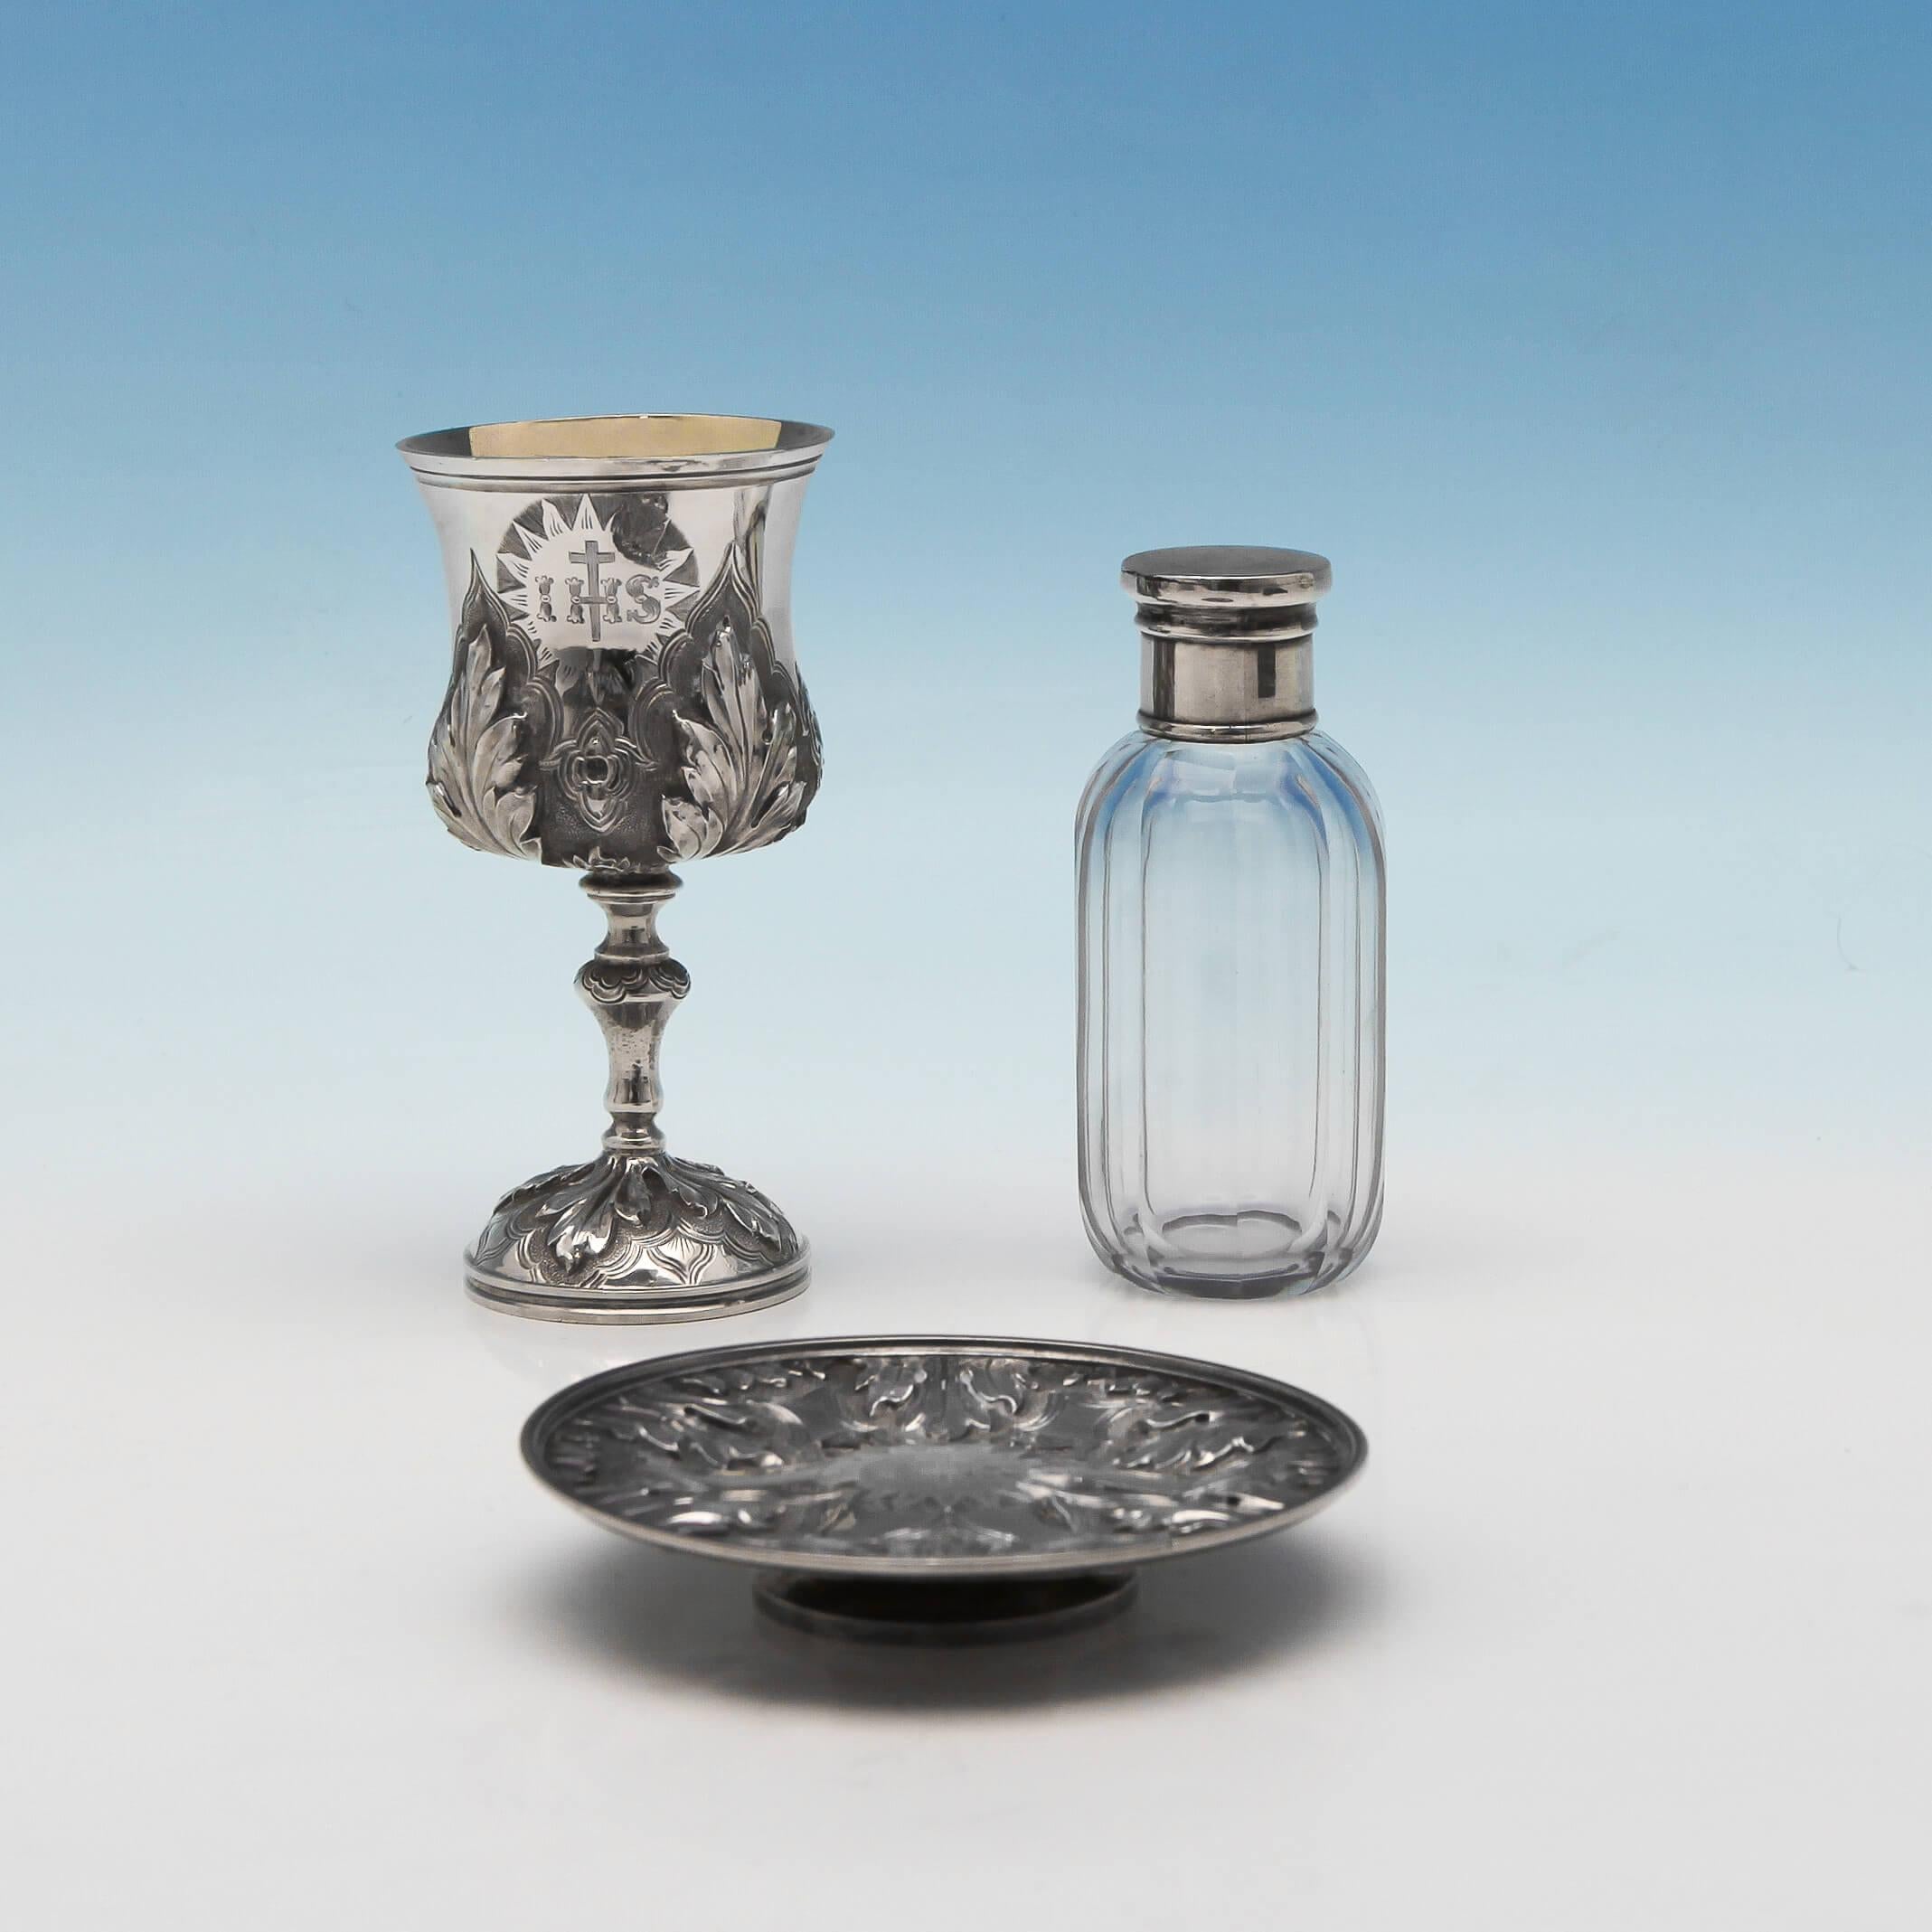 Hallmarked in London in 1872 by Charles Reily & George Storer, this fine antique, Victorian, sterling silver communion set comprises of a chalice with gilt interior measuring 4